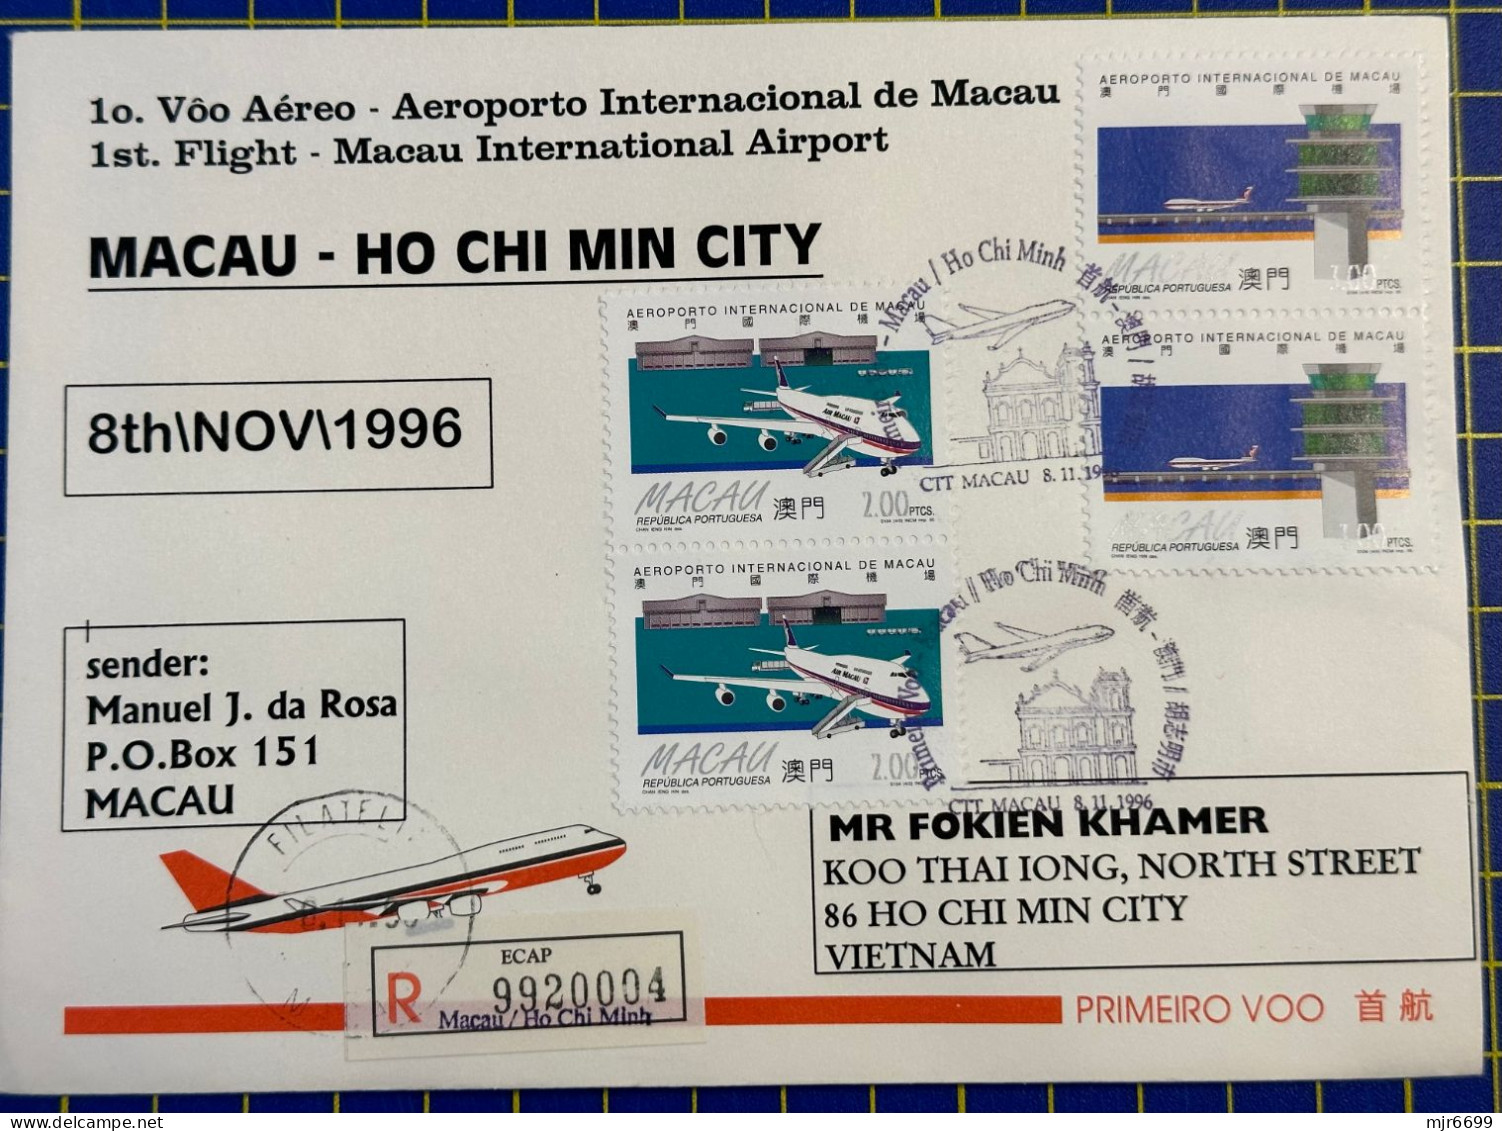 1996 MACAU INTER. AIRPORT FIRST FLIGHT COVER TO HO CHI MIN CITY - Covers & Documents